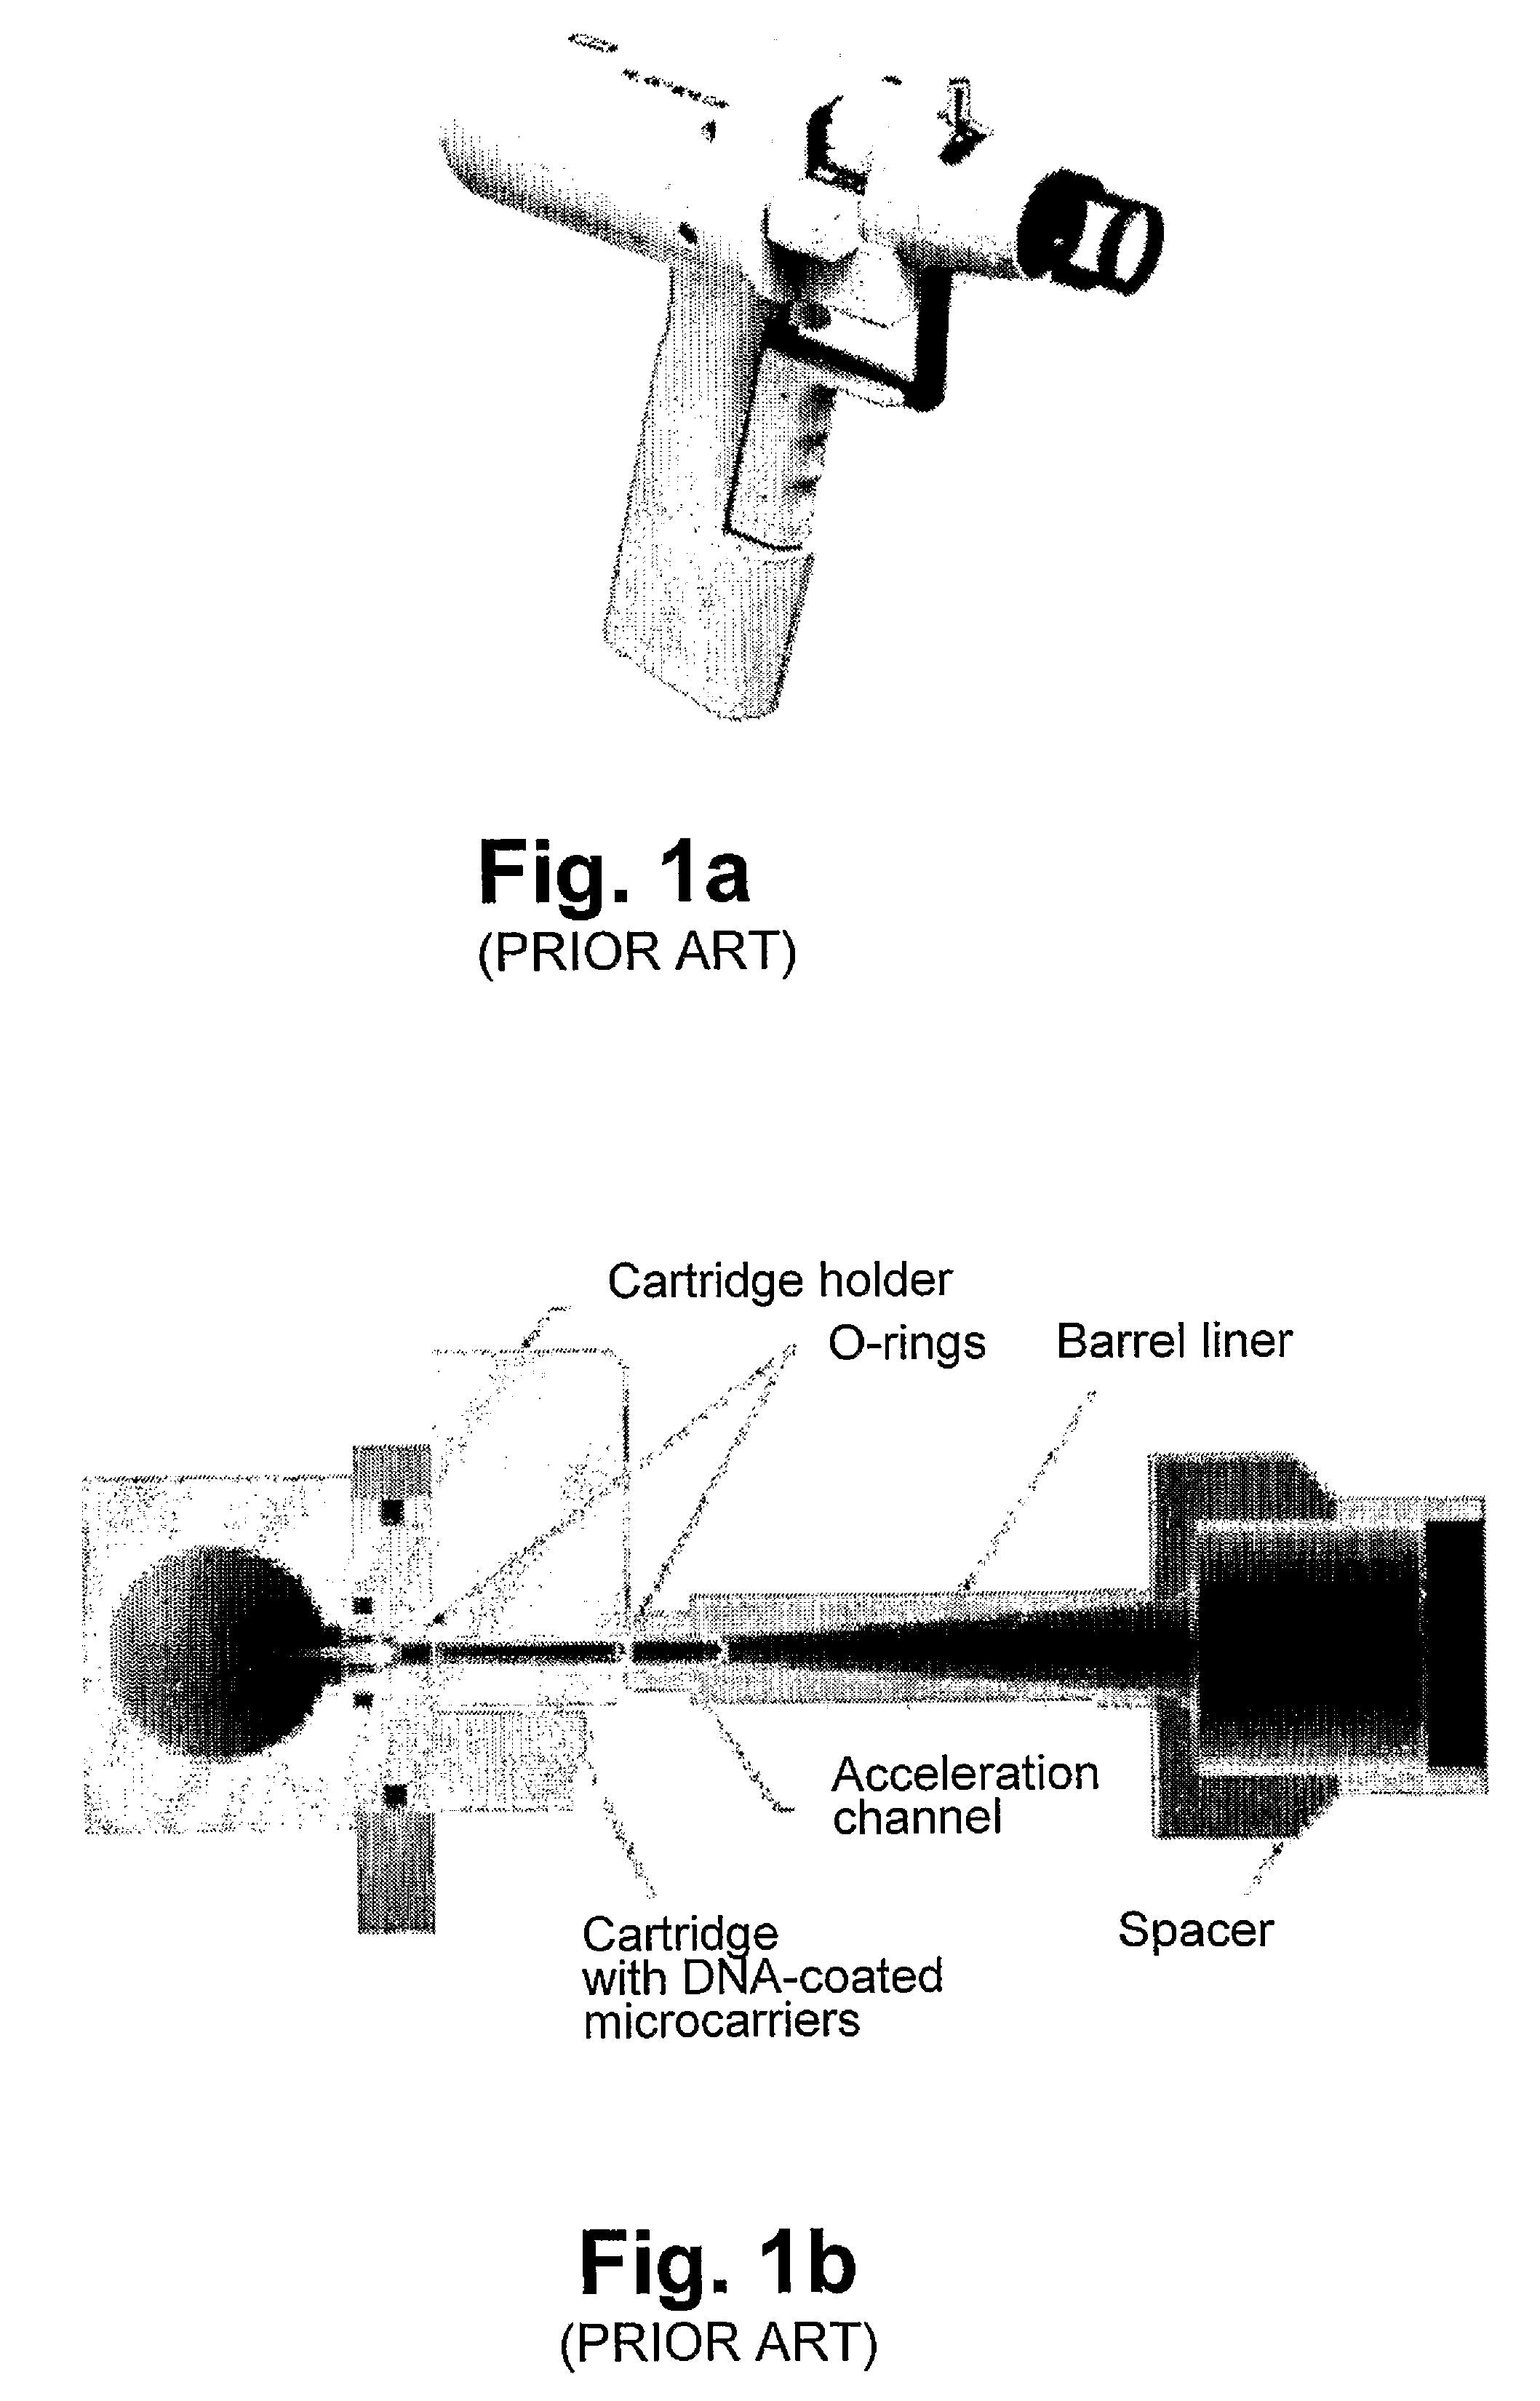 Pneumatic capillary gun for ballistic delivery of microscopic particles into tissue